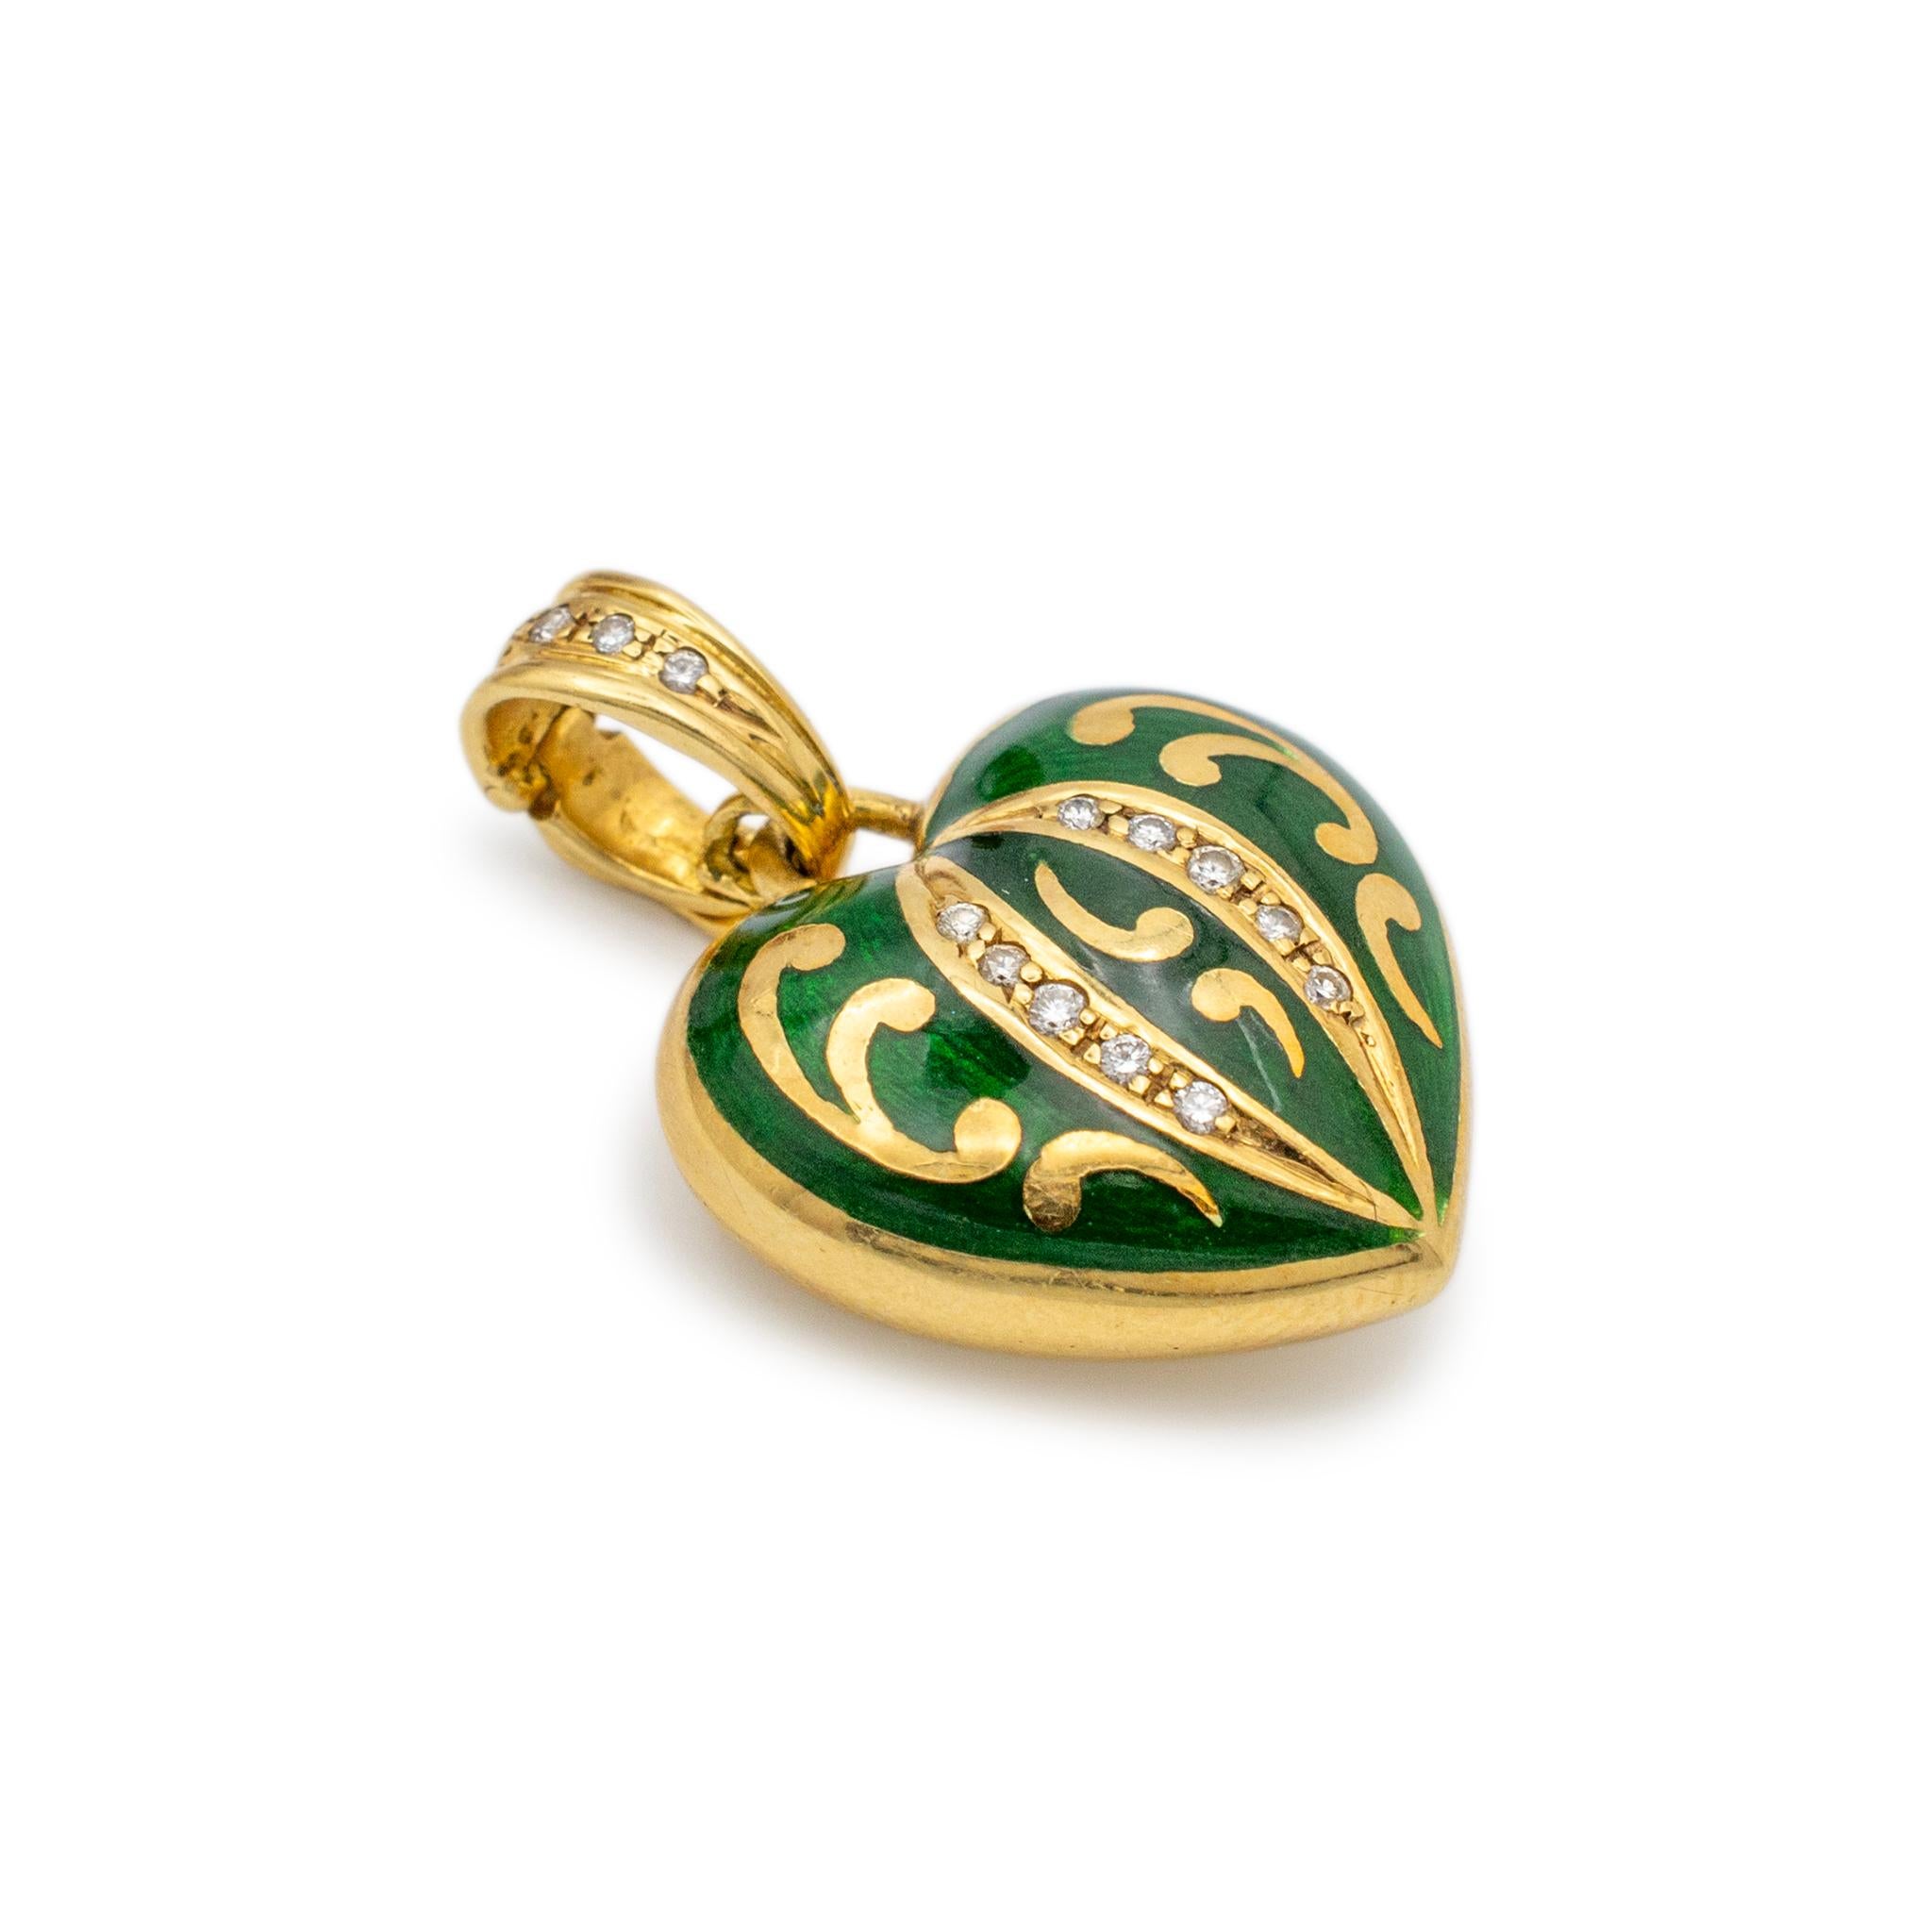 Brand: Faberge

Metal Type: 18K Yellow Gold

Thickness: 8.75 mm

Length: 1.00 inches

Width: 0.75 inches

Weight: 9.09 grams

18K yellow gold symbol diamond vintage heart-shaped pendant. The metal was tested and determined to be 18K yellow gold.